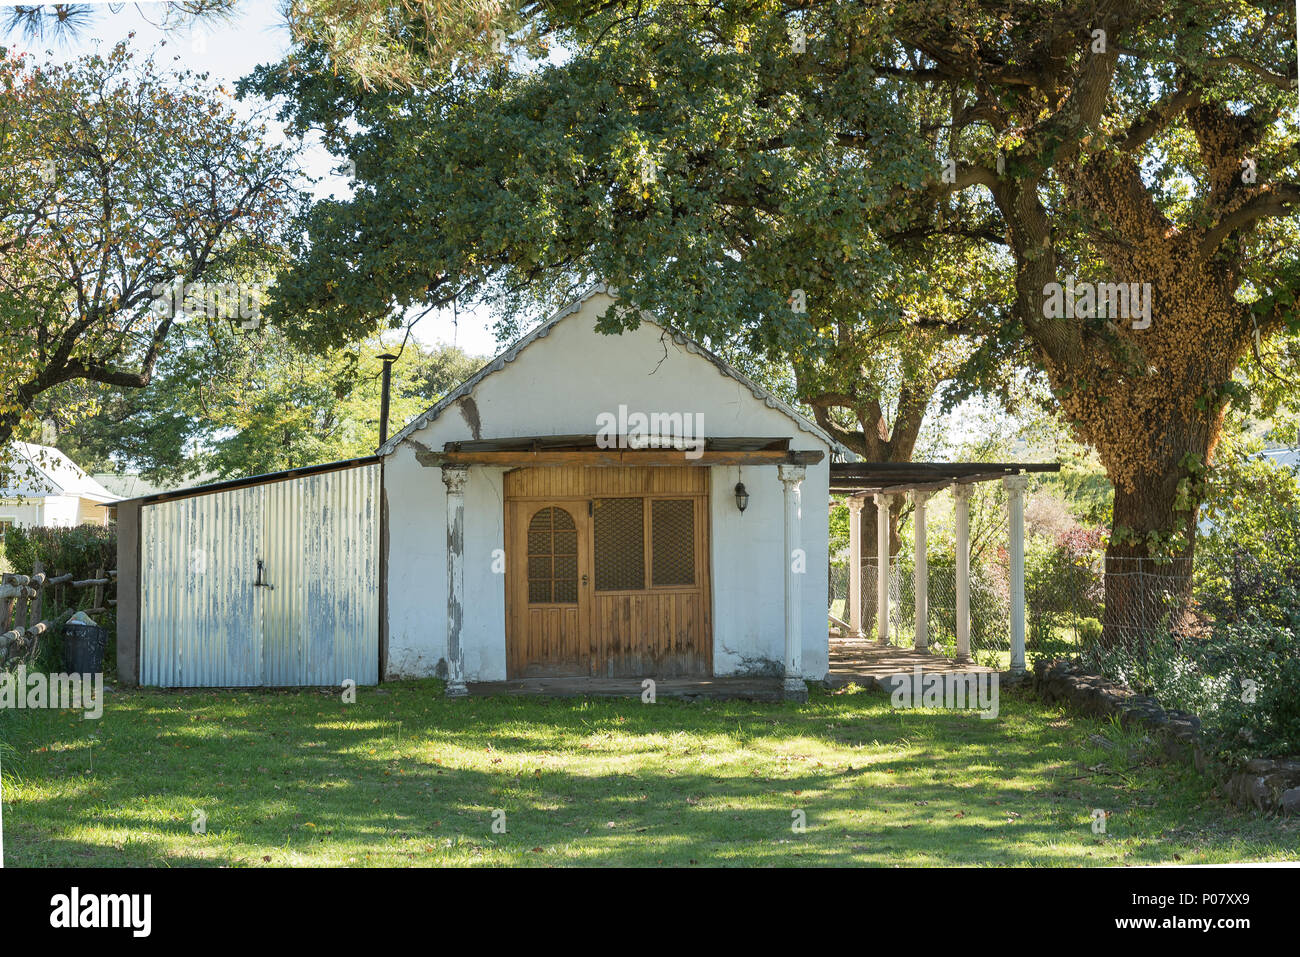 RHODES, SOUTH AFRICA - MARCH 27, 2018: An historic house, under a large oak tree, in Rhodes in the Eastern Cape Province Stock Photo